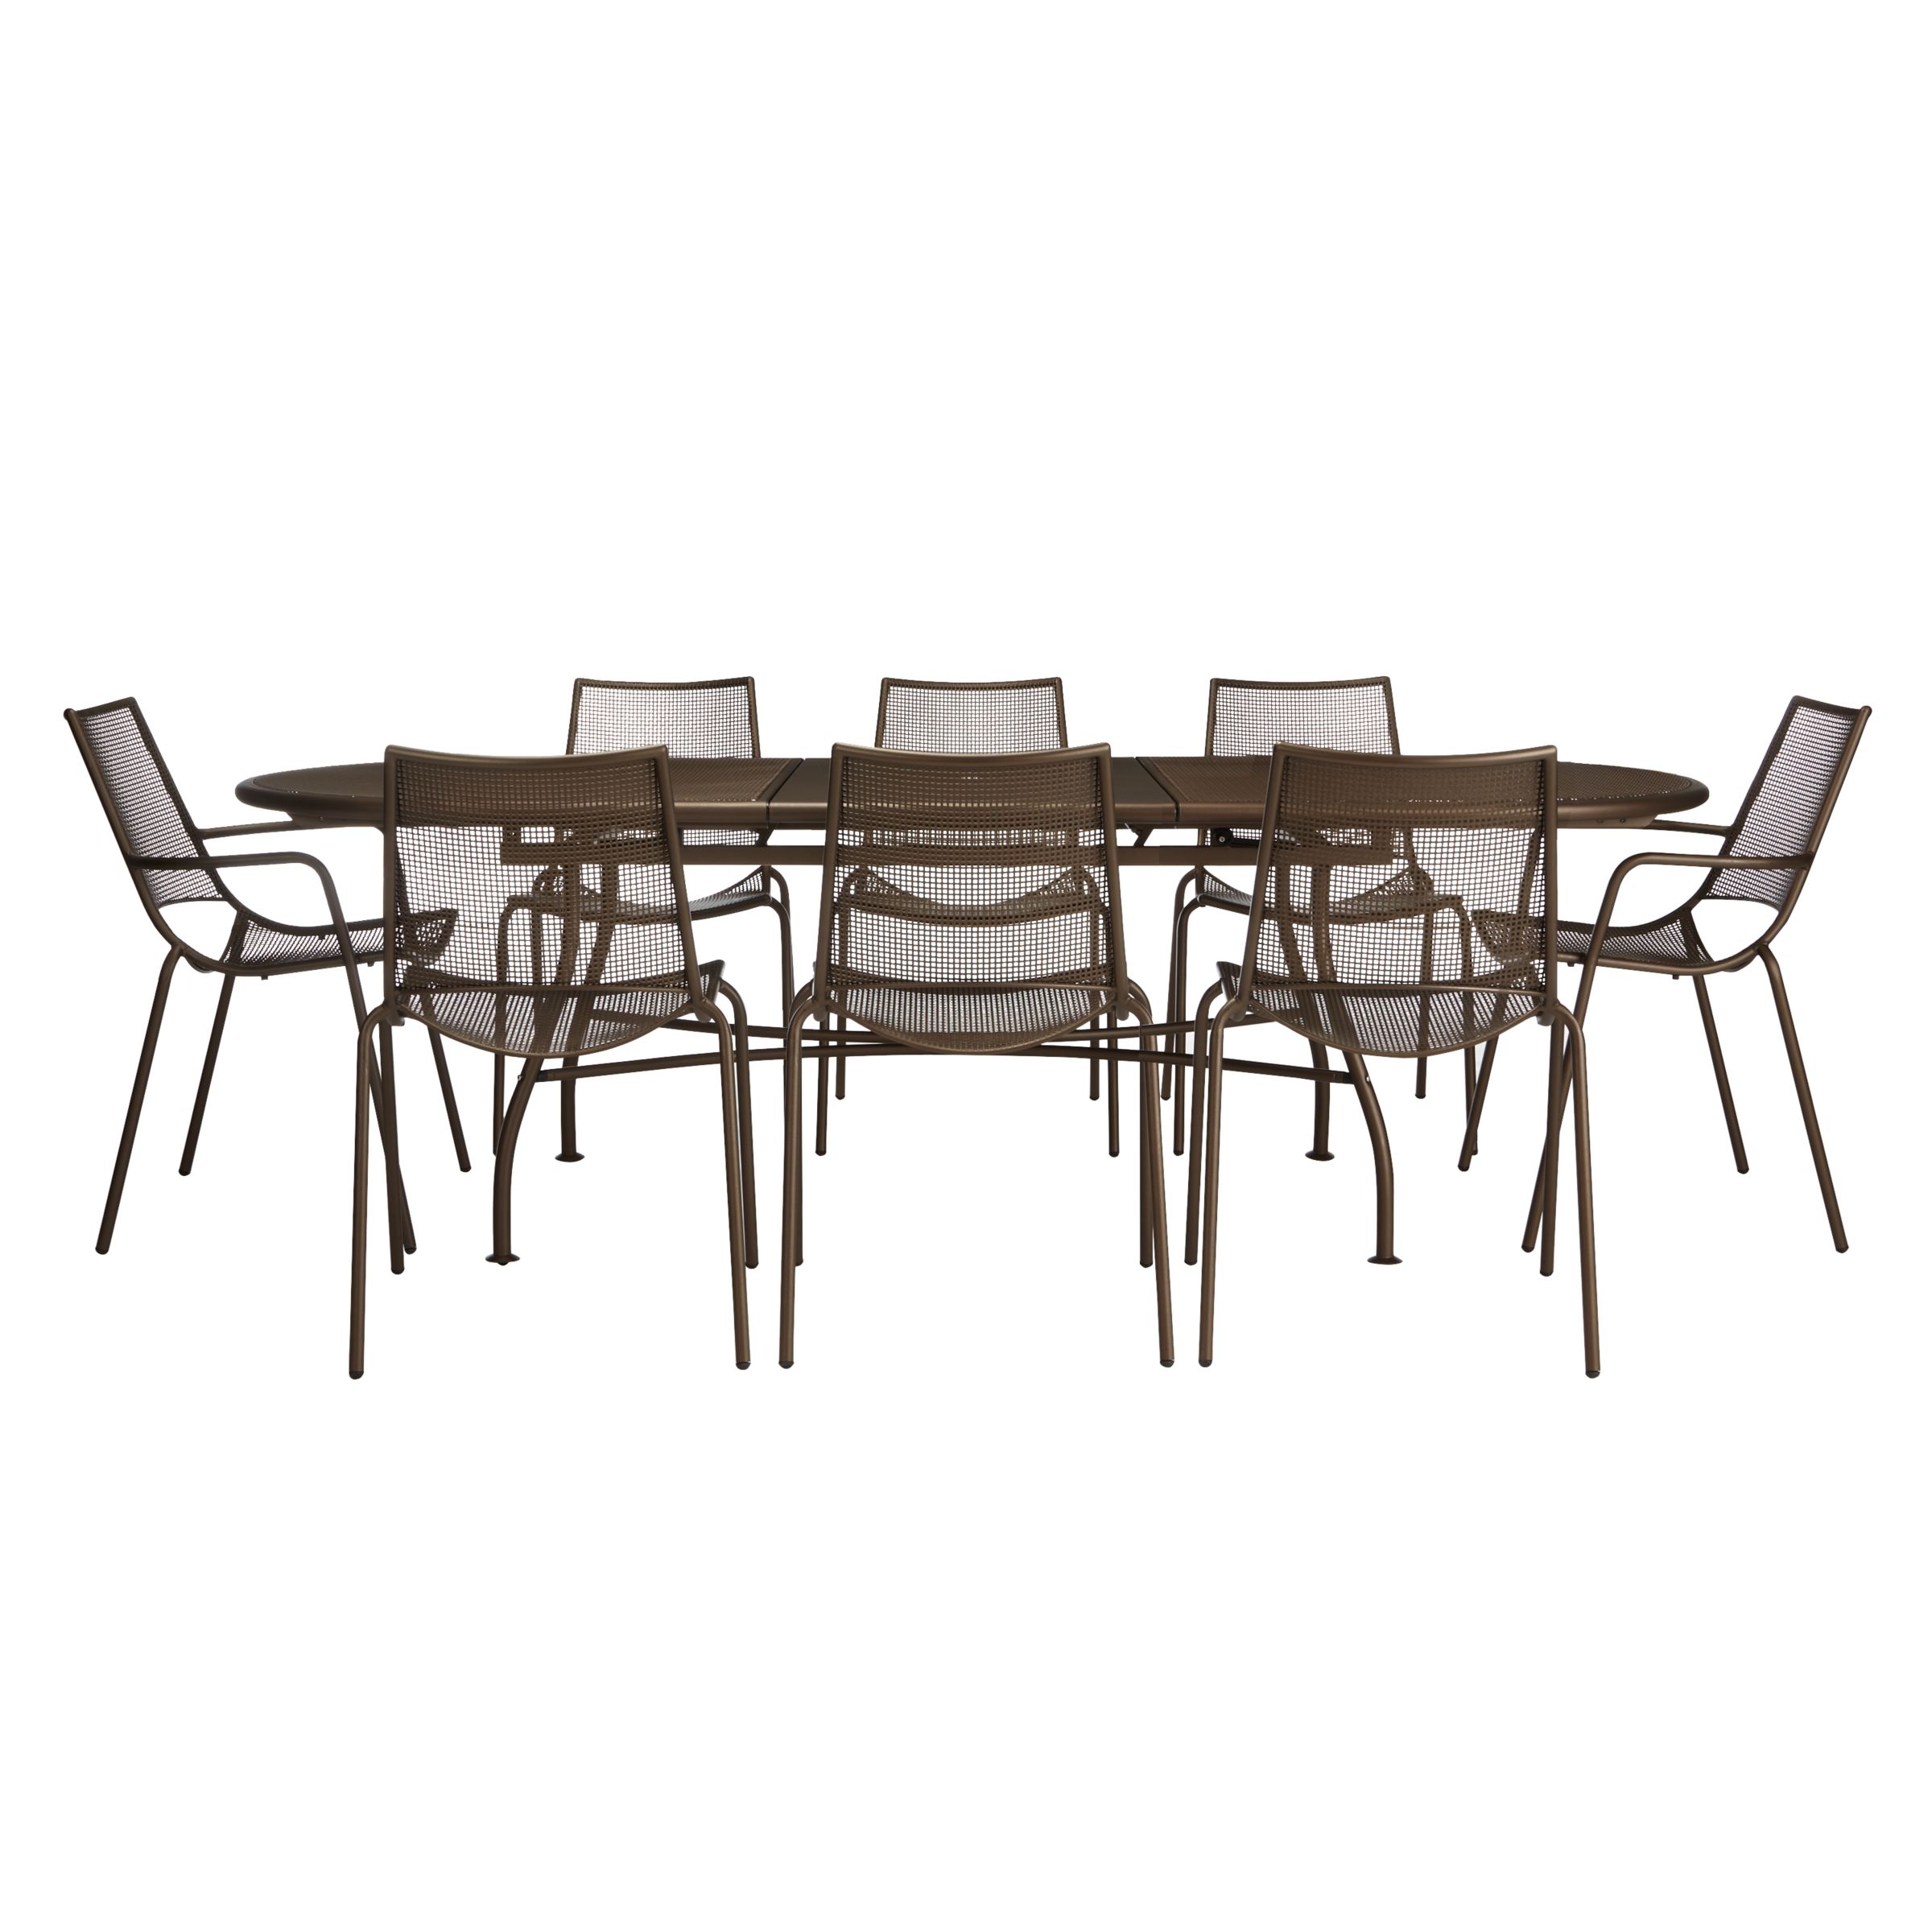 John Lewis & Partners Ala Mesh Extending Garden Dining Table and Chairs Set, Bronze